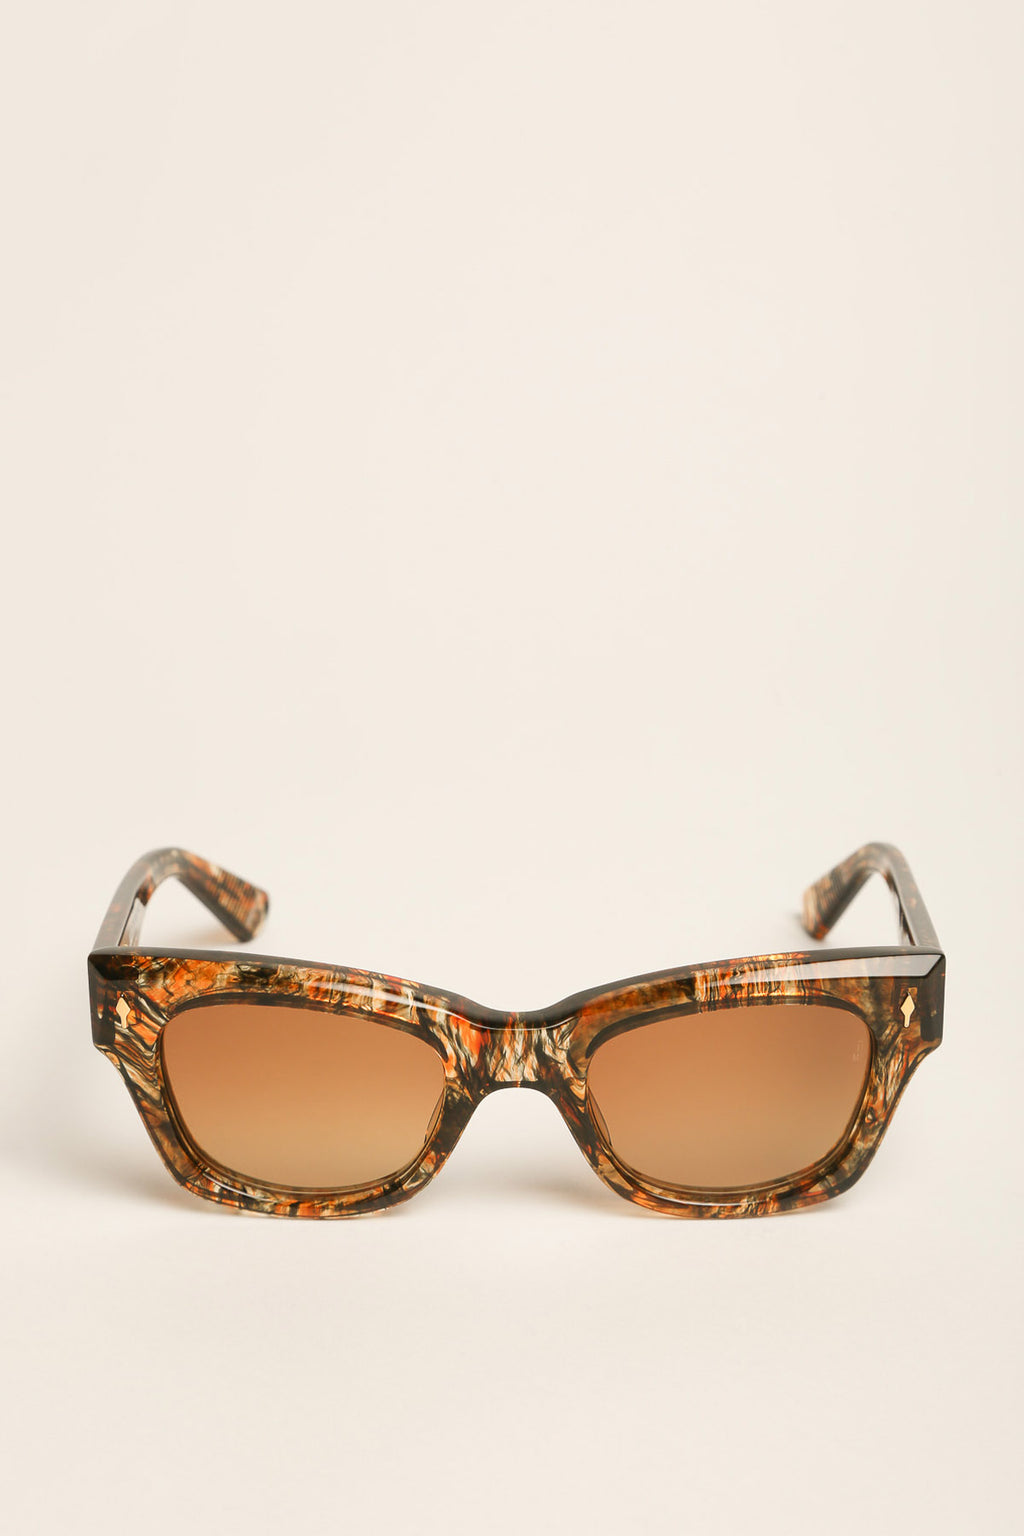 JACQUES MARIE MAGE | ALL THESE NIGHTS AMBER SUNGLASSES